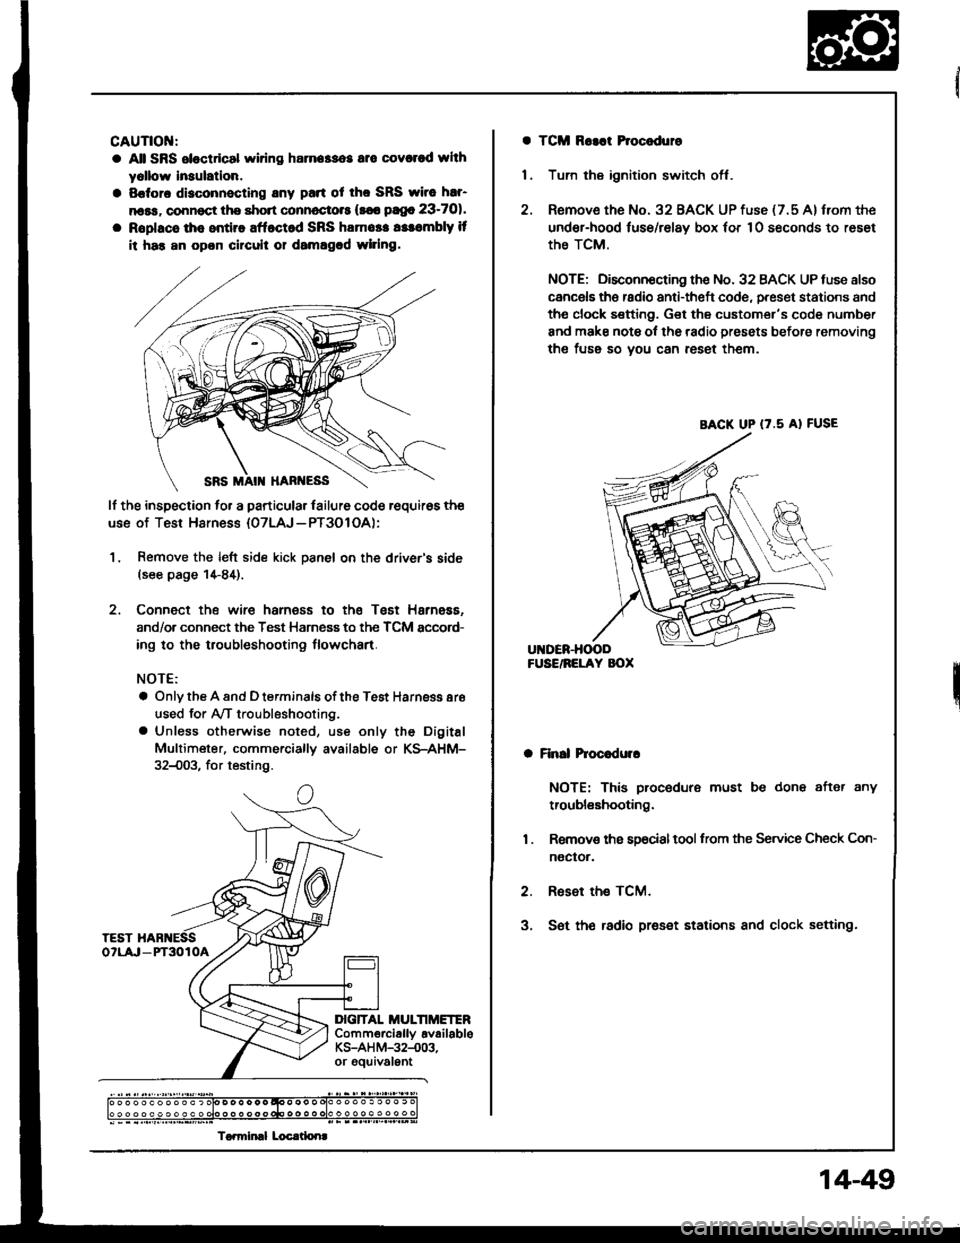 HONDA INTEGRA 1994 4.G Workshop Manual CAUTIOI{:
a All SRS eloctdcal wiring harna$os are covcred whh
yollow lnaulation.
a Sofora disconnecting any pan ot tho SRS wirc har
n6ss, connoct the short connoctots (s€6 pago 23-701.
a Roplacs th